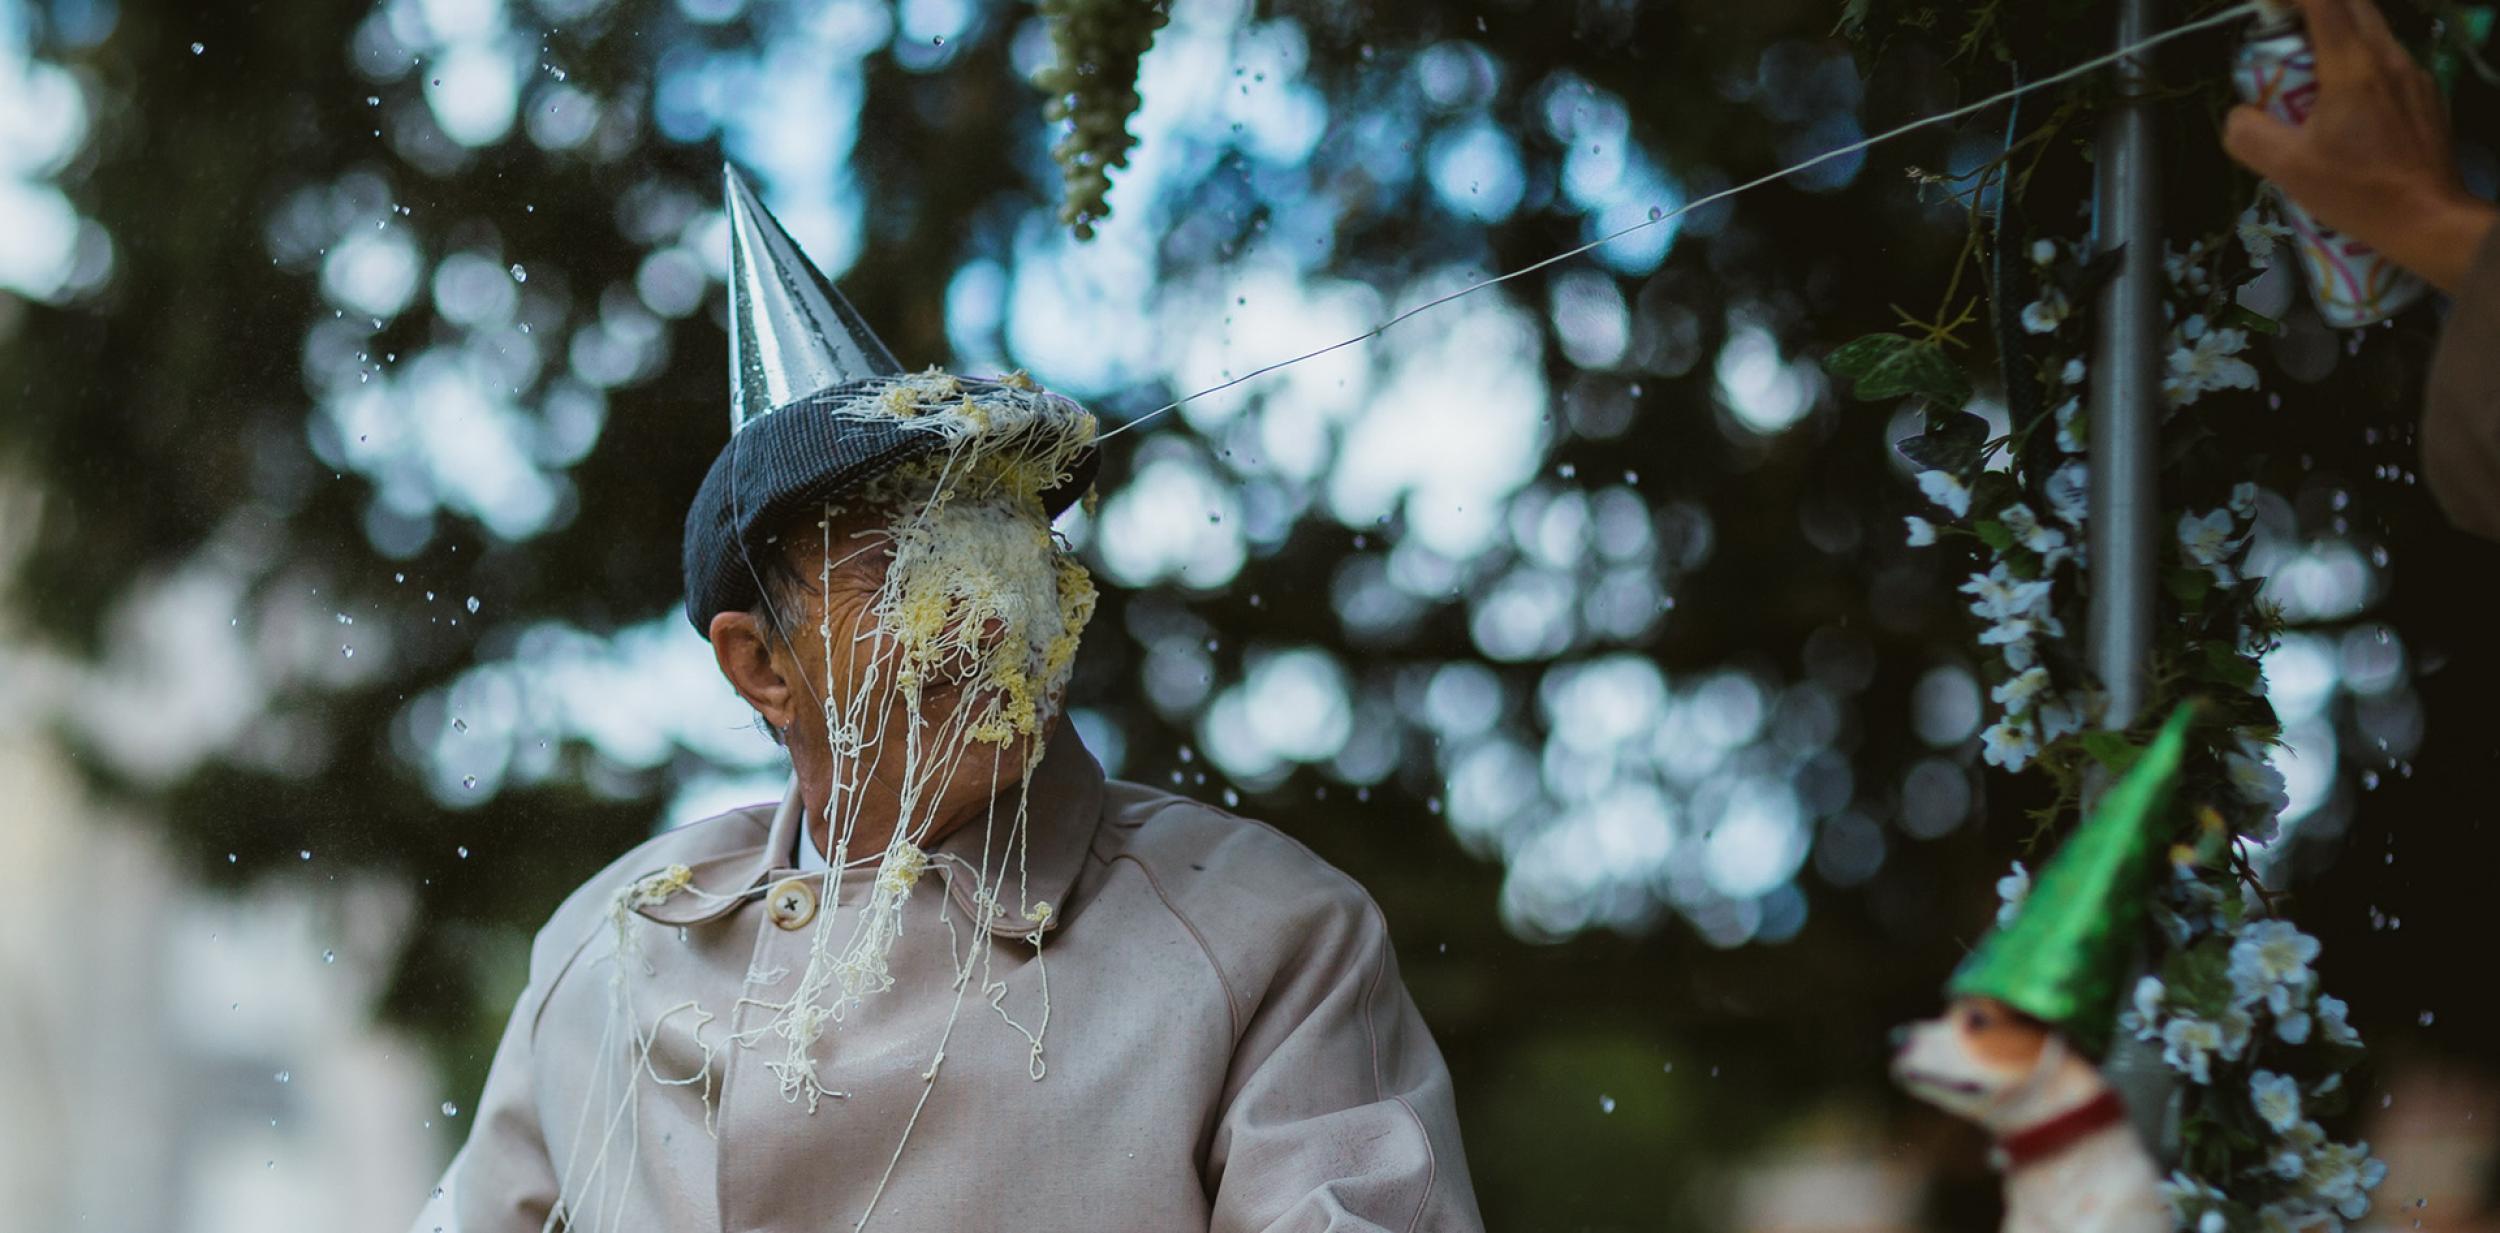 Man wearing party hat with face covered in silly string